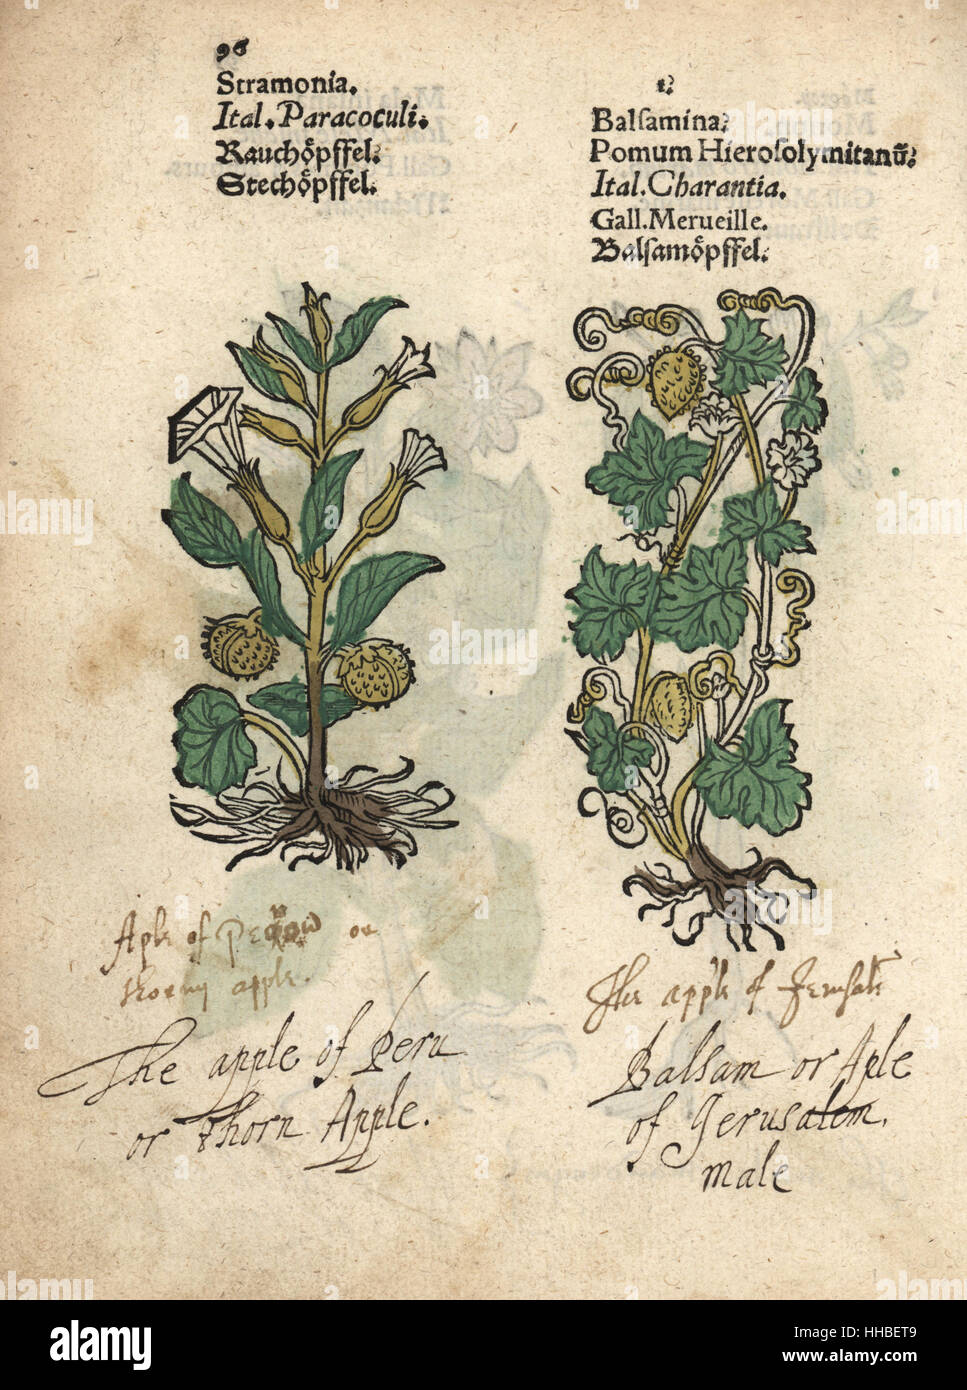 Thorn apple, Datura metel, and balsam apple, Momordica balsamina. Handcoloured woodblock engraving of a botanical illustration from Adam Lonicer's Krauterbuch, or Herbal, Frankfurt, 1557. This from a 17th century pirate edition or atlas of illustrations only, with captions in Latin, Greek, French, Italian, German, and in English manuscript. Stock Photo